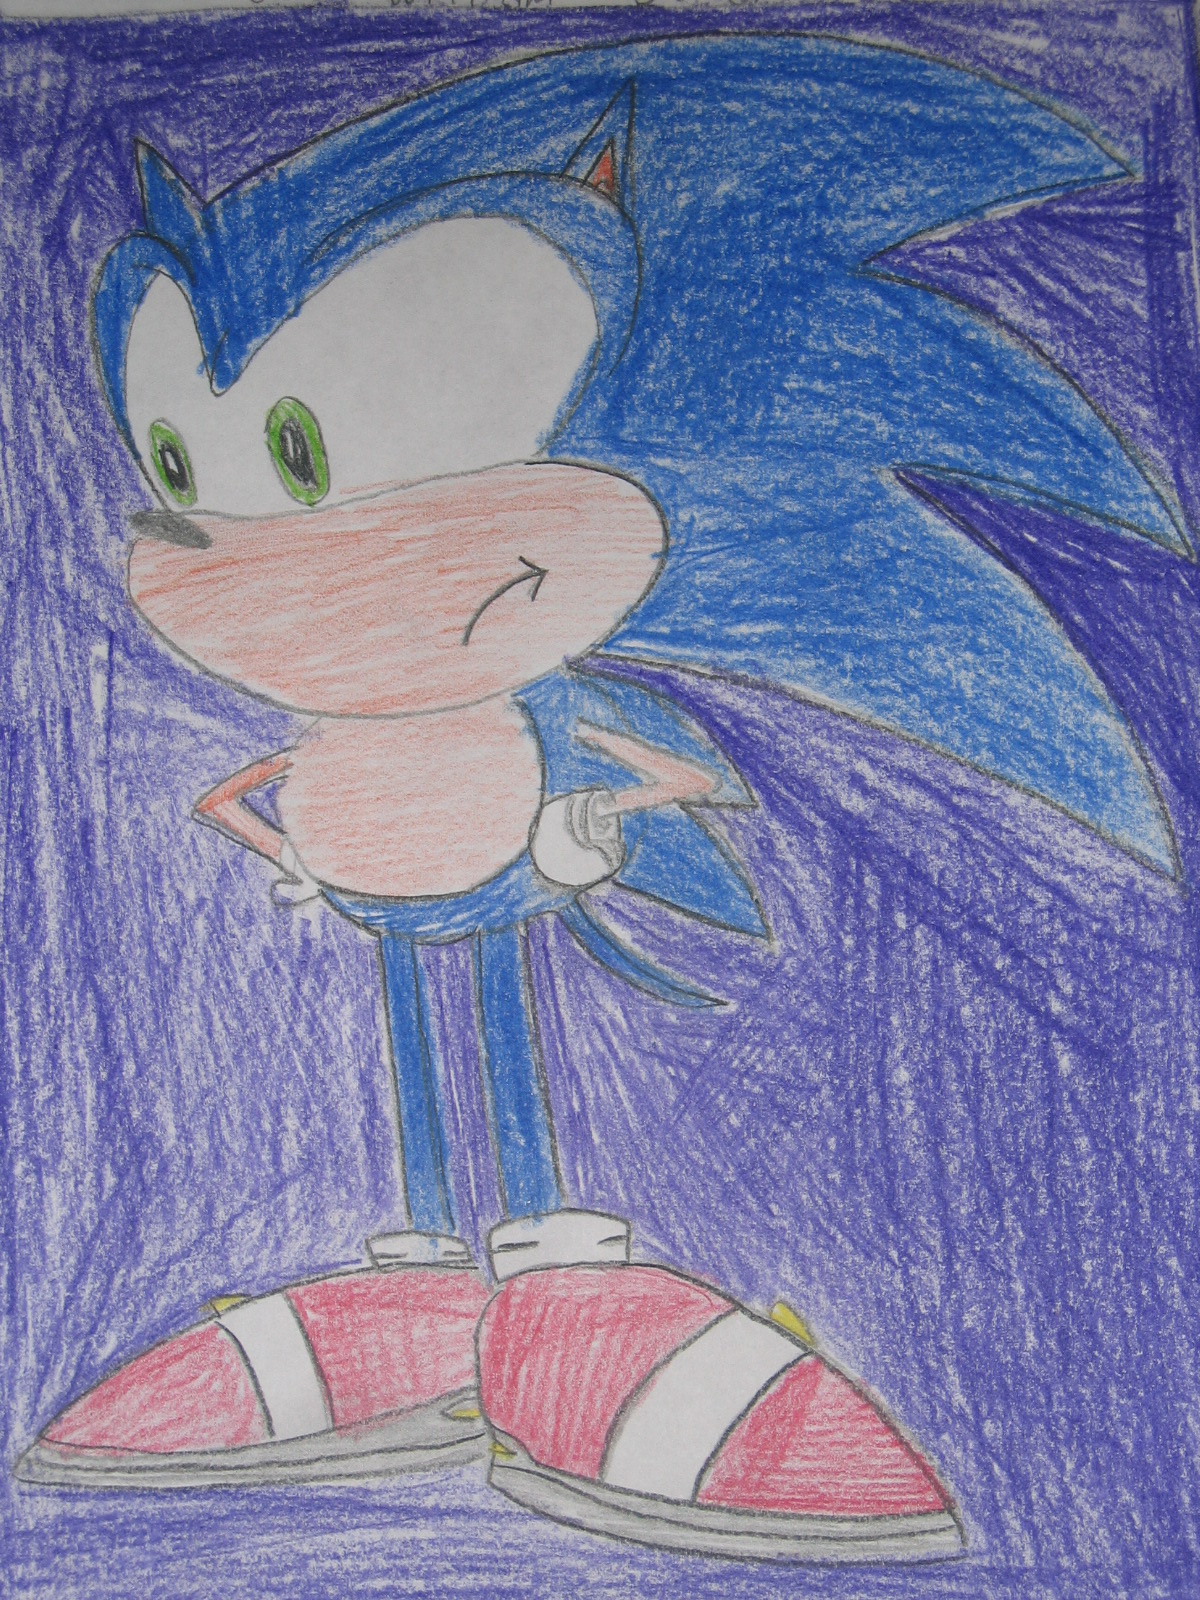 Just a Sonic Pic by germanname